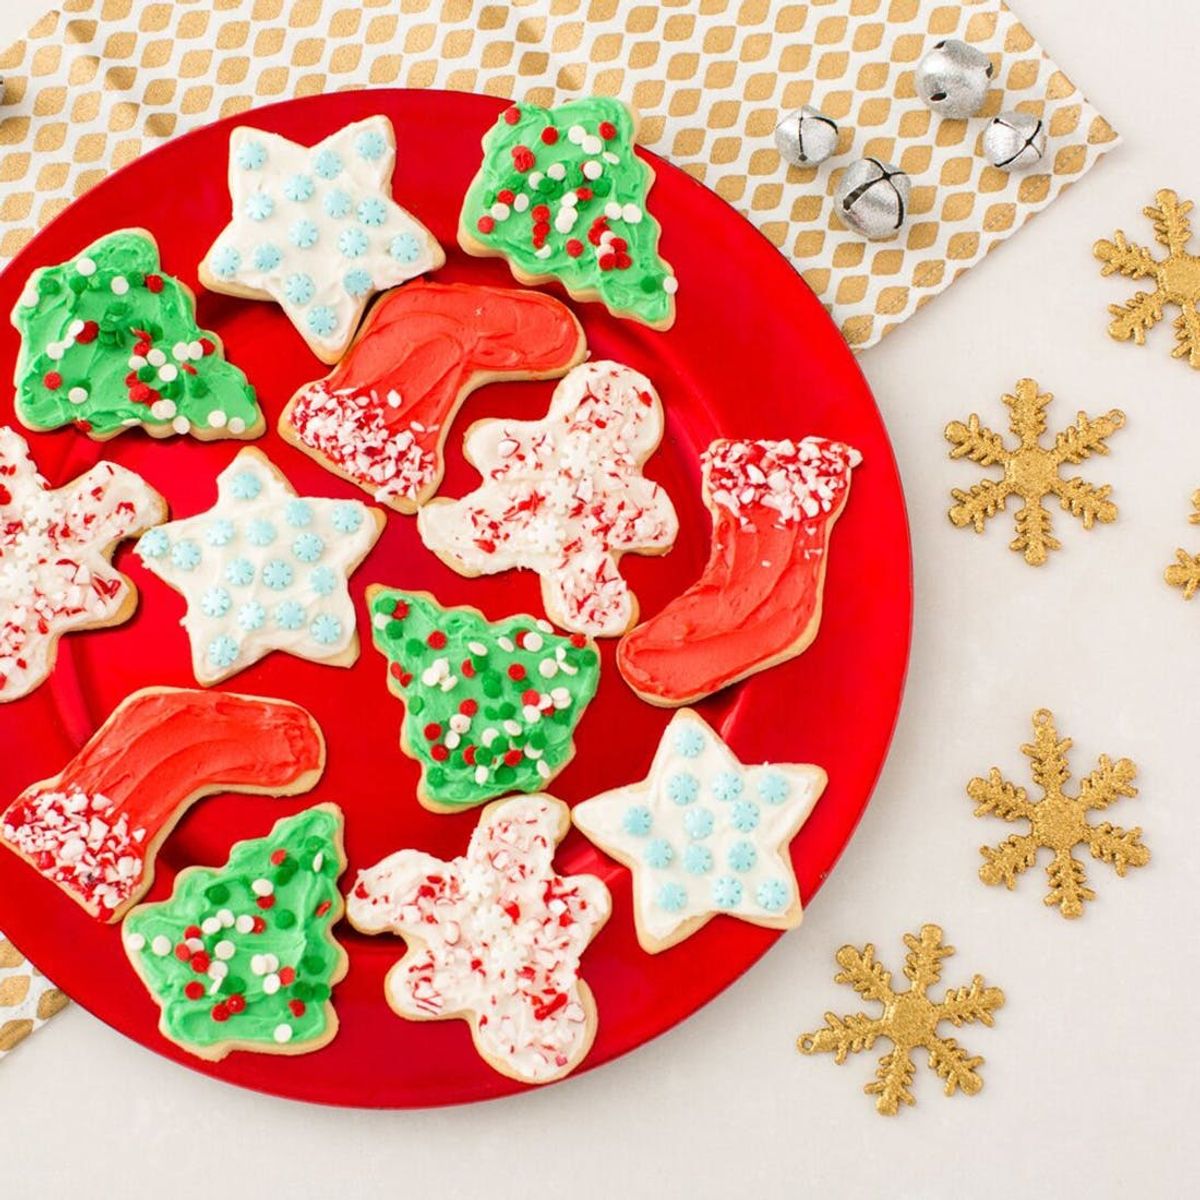 This Is the Frosting Trick That Will Make Christmas Cookie Decorating Easy